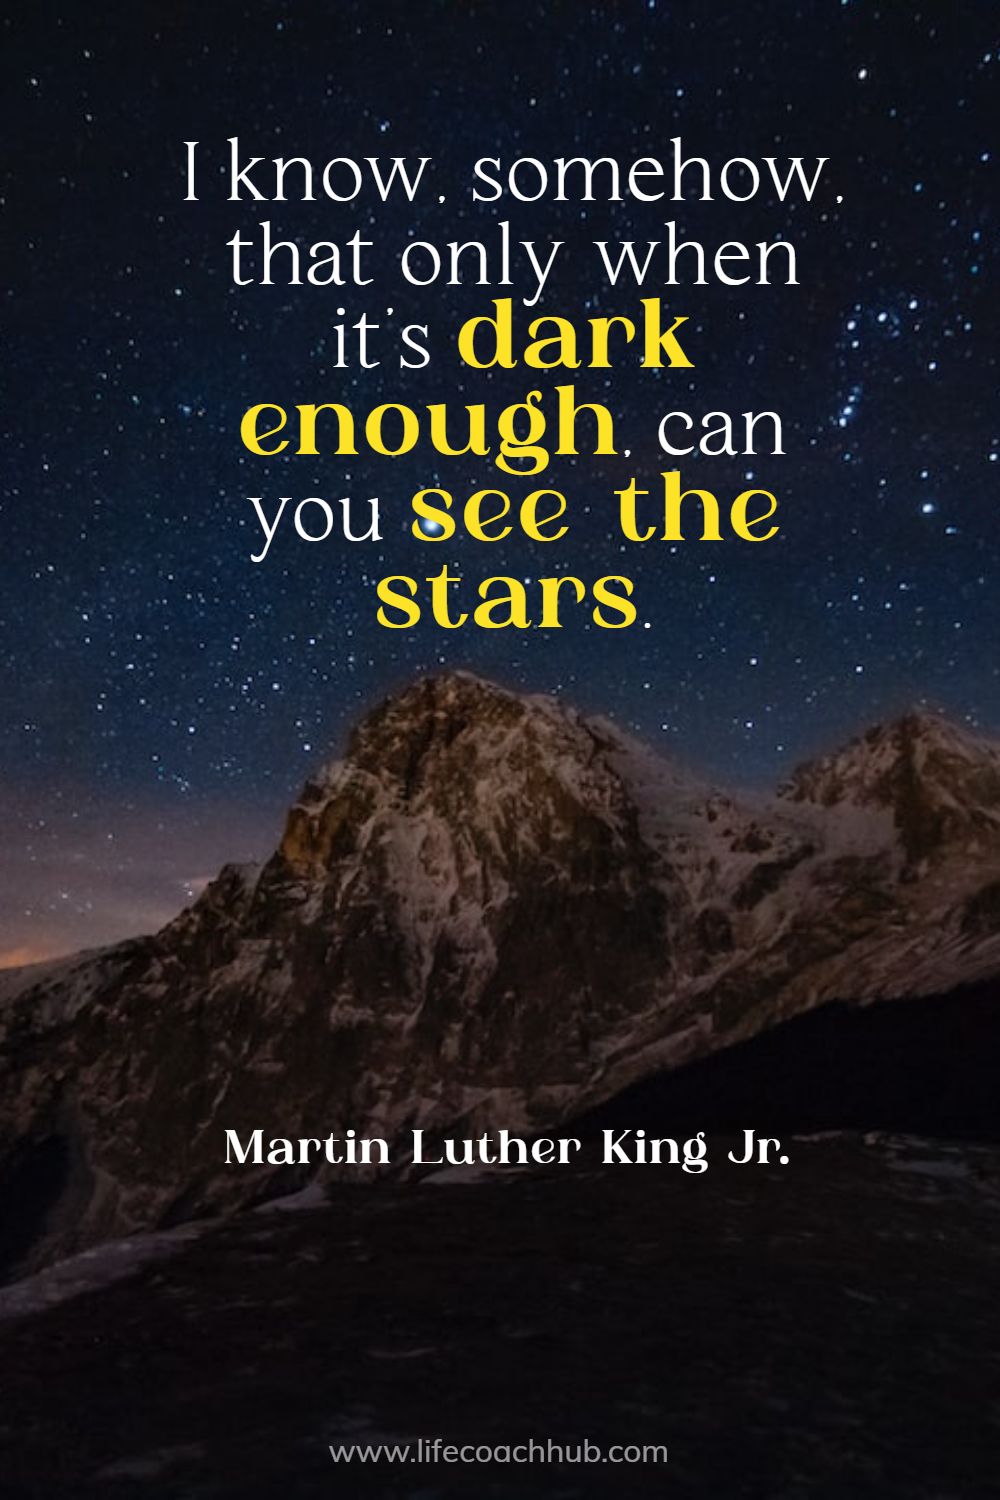 I know, somehow that only when it's dark enough, can you see the stars. Martin Luther King Jr. Coaching Quote